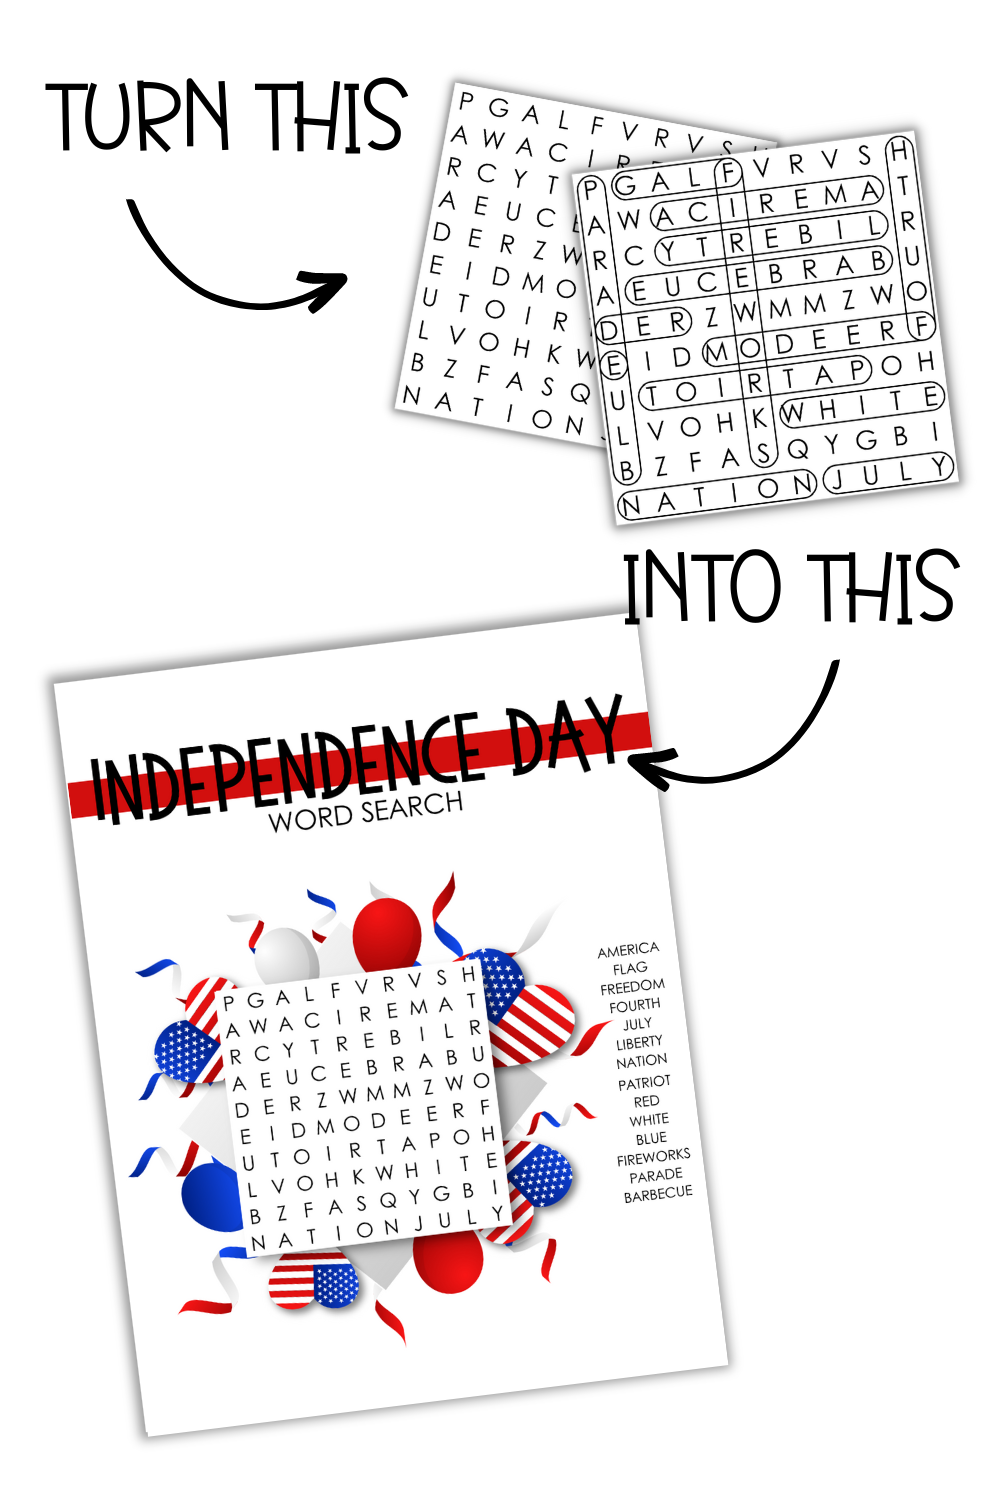 INDEPENDENCE DAY WORD SEARCH TEMPLATE